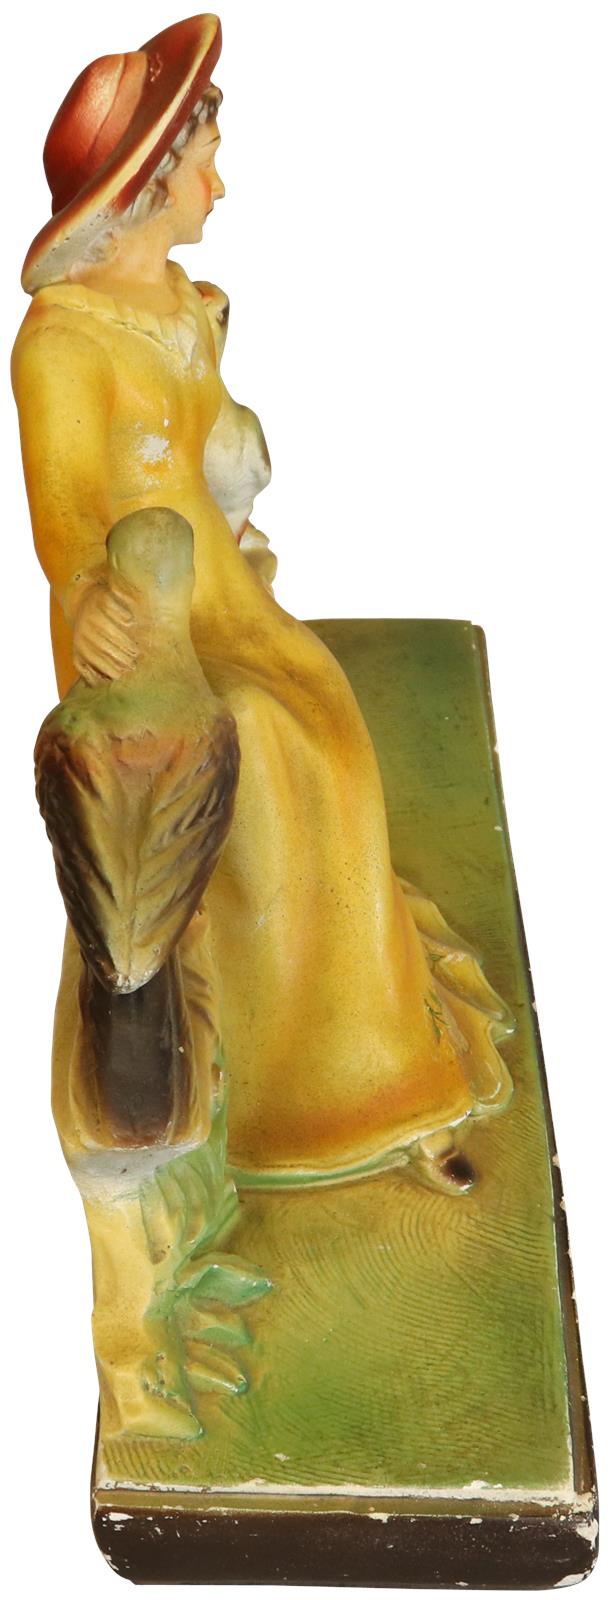 Colorful Antique Art Deco Chalkware Sculpture of Lady with Birds and Pair of Vases-Image 9